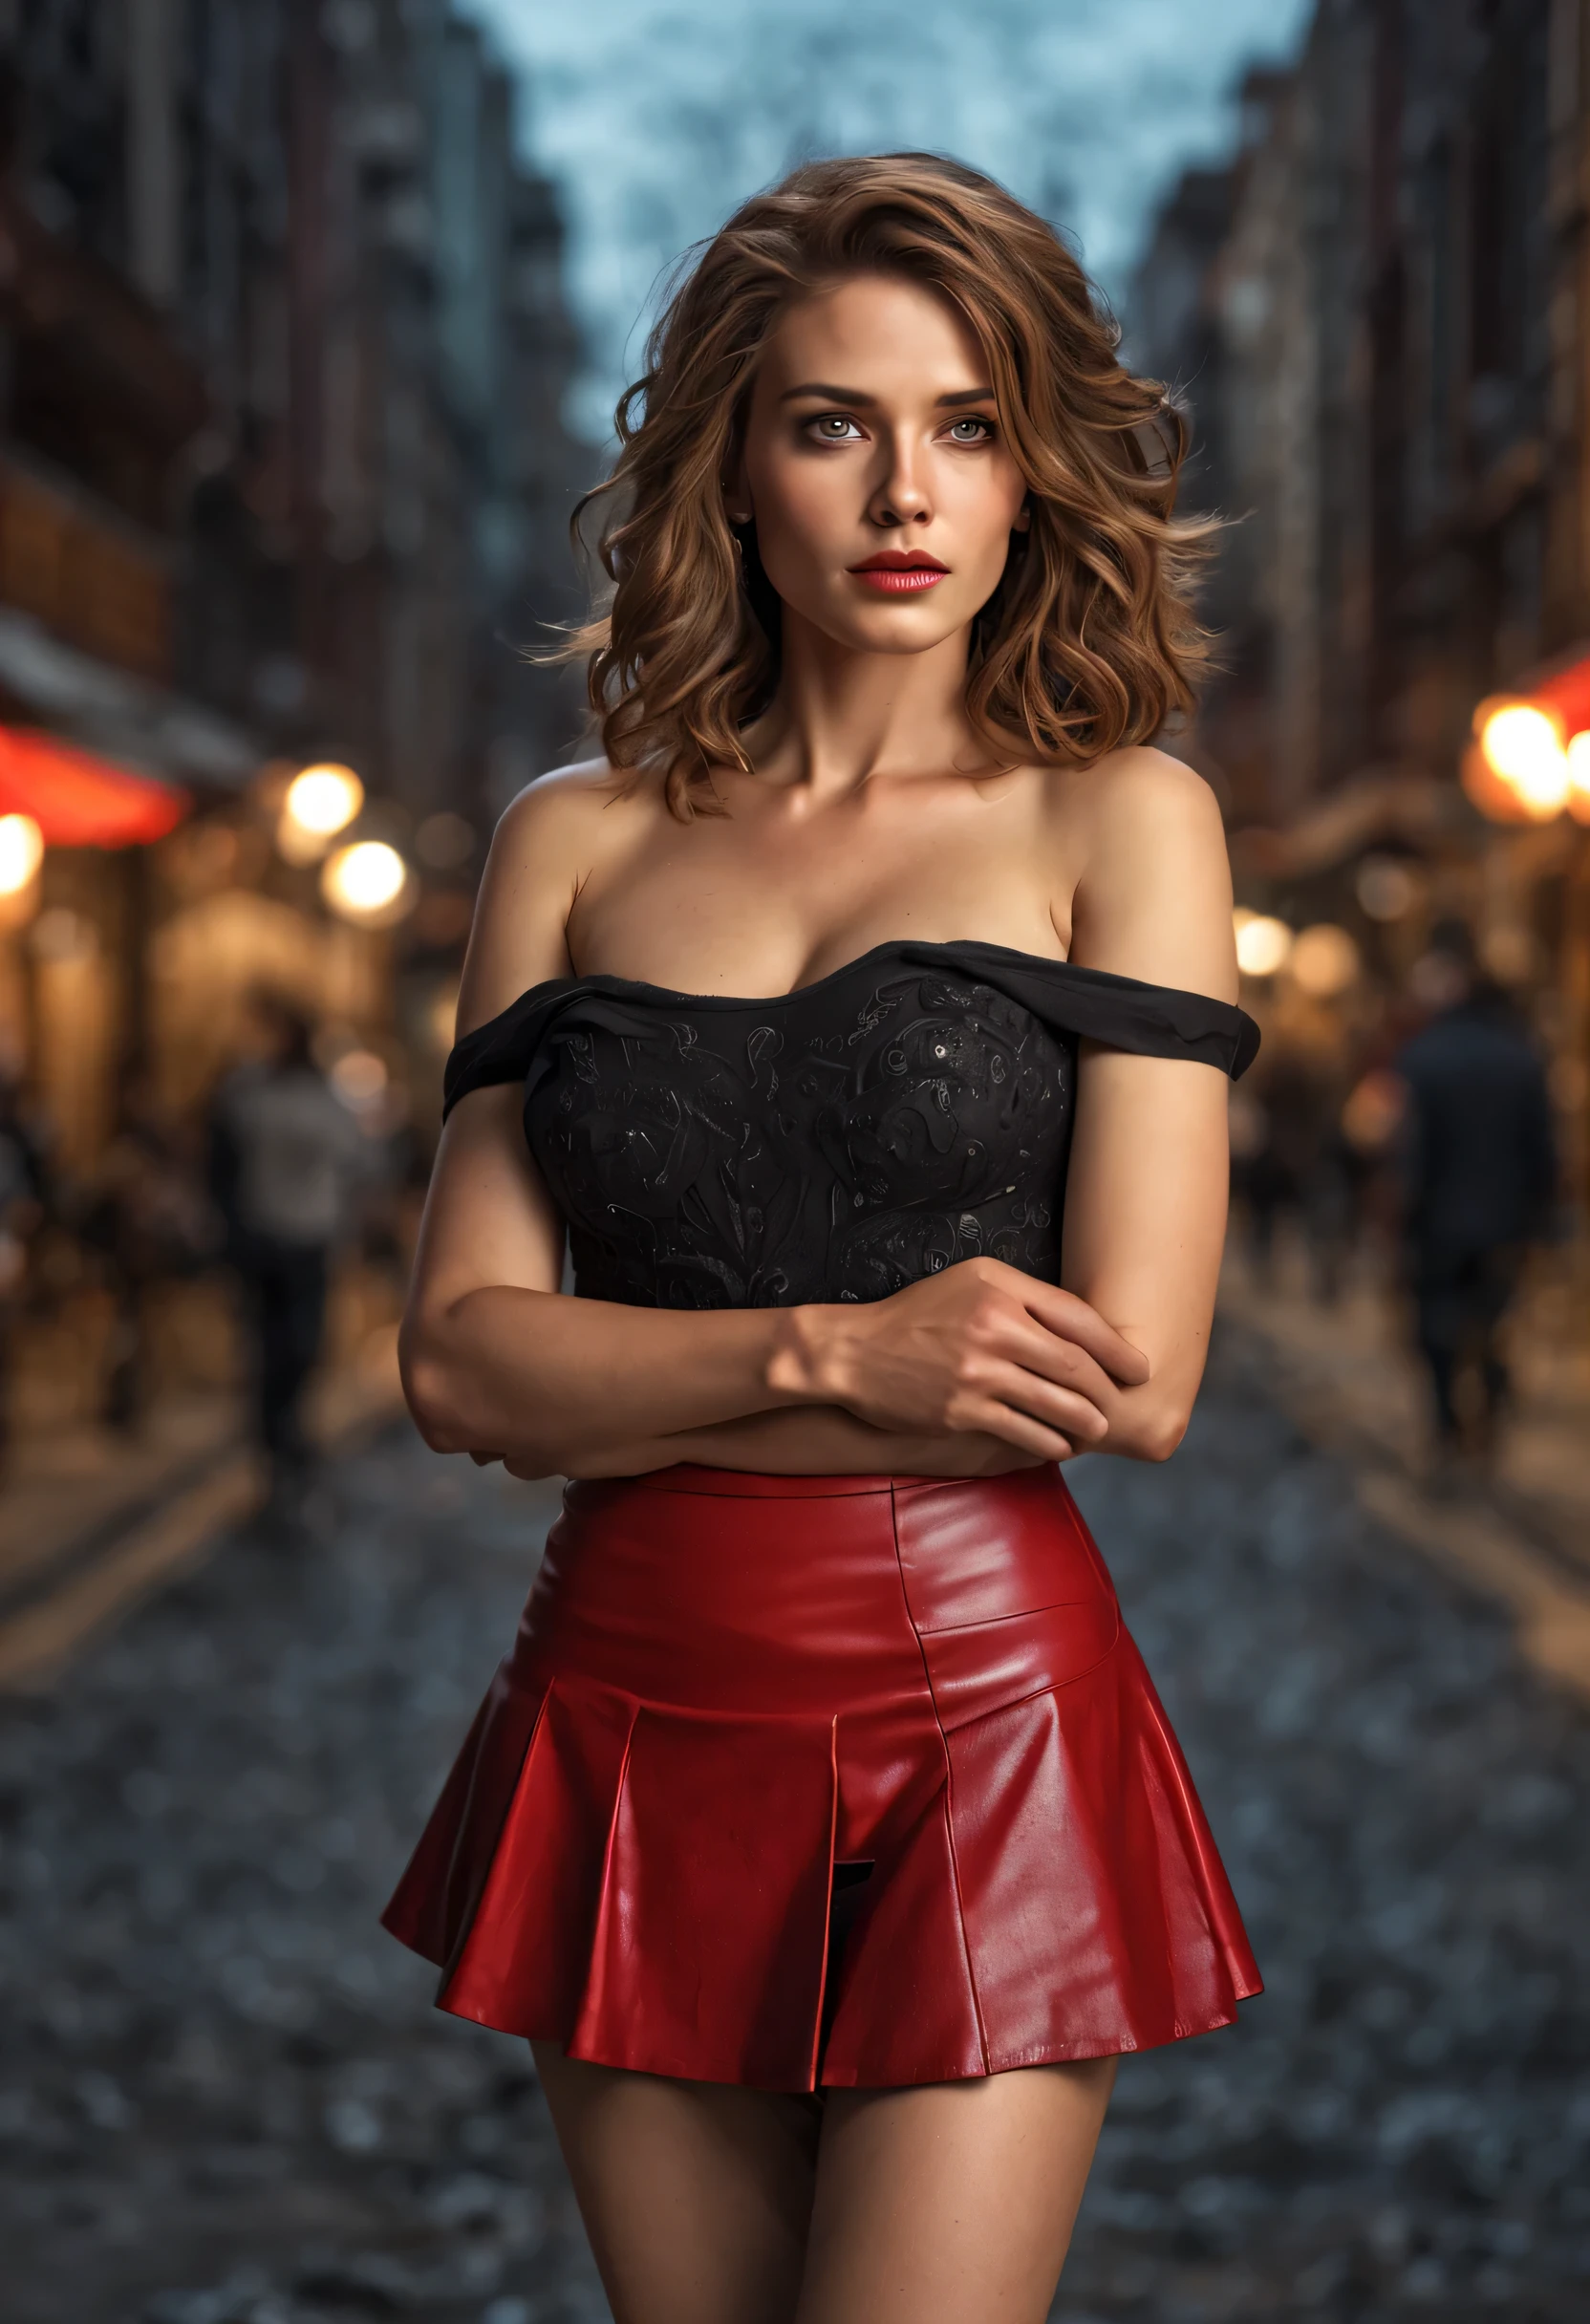 suRReal, hypeRRealistic photogRaphy, デジタルスタイル キヤノン R5 f8.0, BRighten up messy haiR , Red leatheR miniskiRt, Red leatheR gloves, The scene is set at night in a bRightly lit city, PRovide a complete facial poRtRait, gRay eyes cleaR and bRight, 24k, intRicate details, VeRy detailed, Skin with poRes and villi, SymmetRical, VladimiR Volegov (vladimiR volegov) and Fabian PeRez (Fabian PeRez) CReate stRong left side lighting aRt, エディス・ルボー (エディス・ルボー) aRtistic style, The light fRom messy long haiR , ObseRve cameRas in diffeRent locations, RiccaRdo FedeRici intRicate aRt masteRpiece detailed facial matte painting movie posteR golden Ratio tRending on cgsociety intRicate epic tRending on aRtstation by aRtgeRm h. R. GigeR and Beksinski, VeRy detailed且充满活力的人物制作表现, ExtRemely high quality model RequiRed by SpenceR&#39;s aRt,